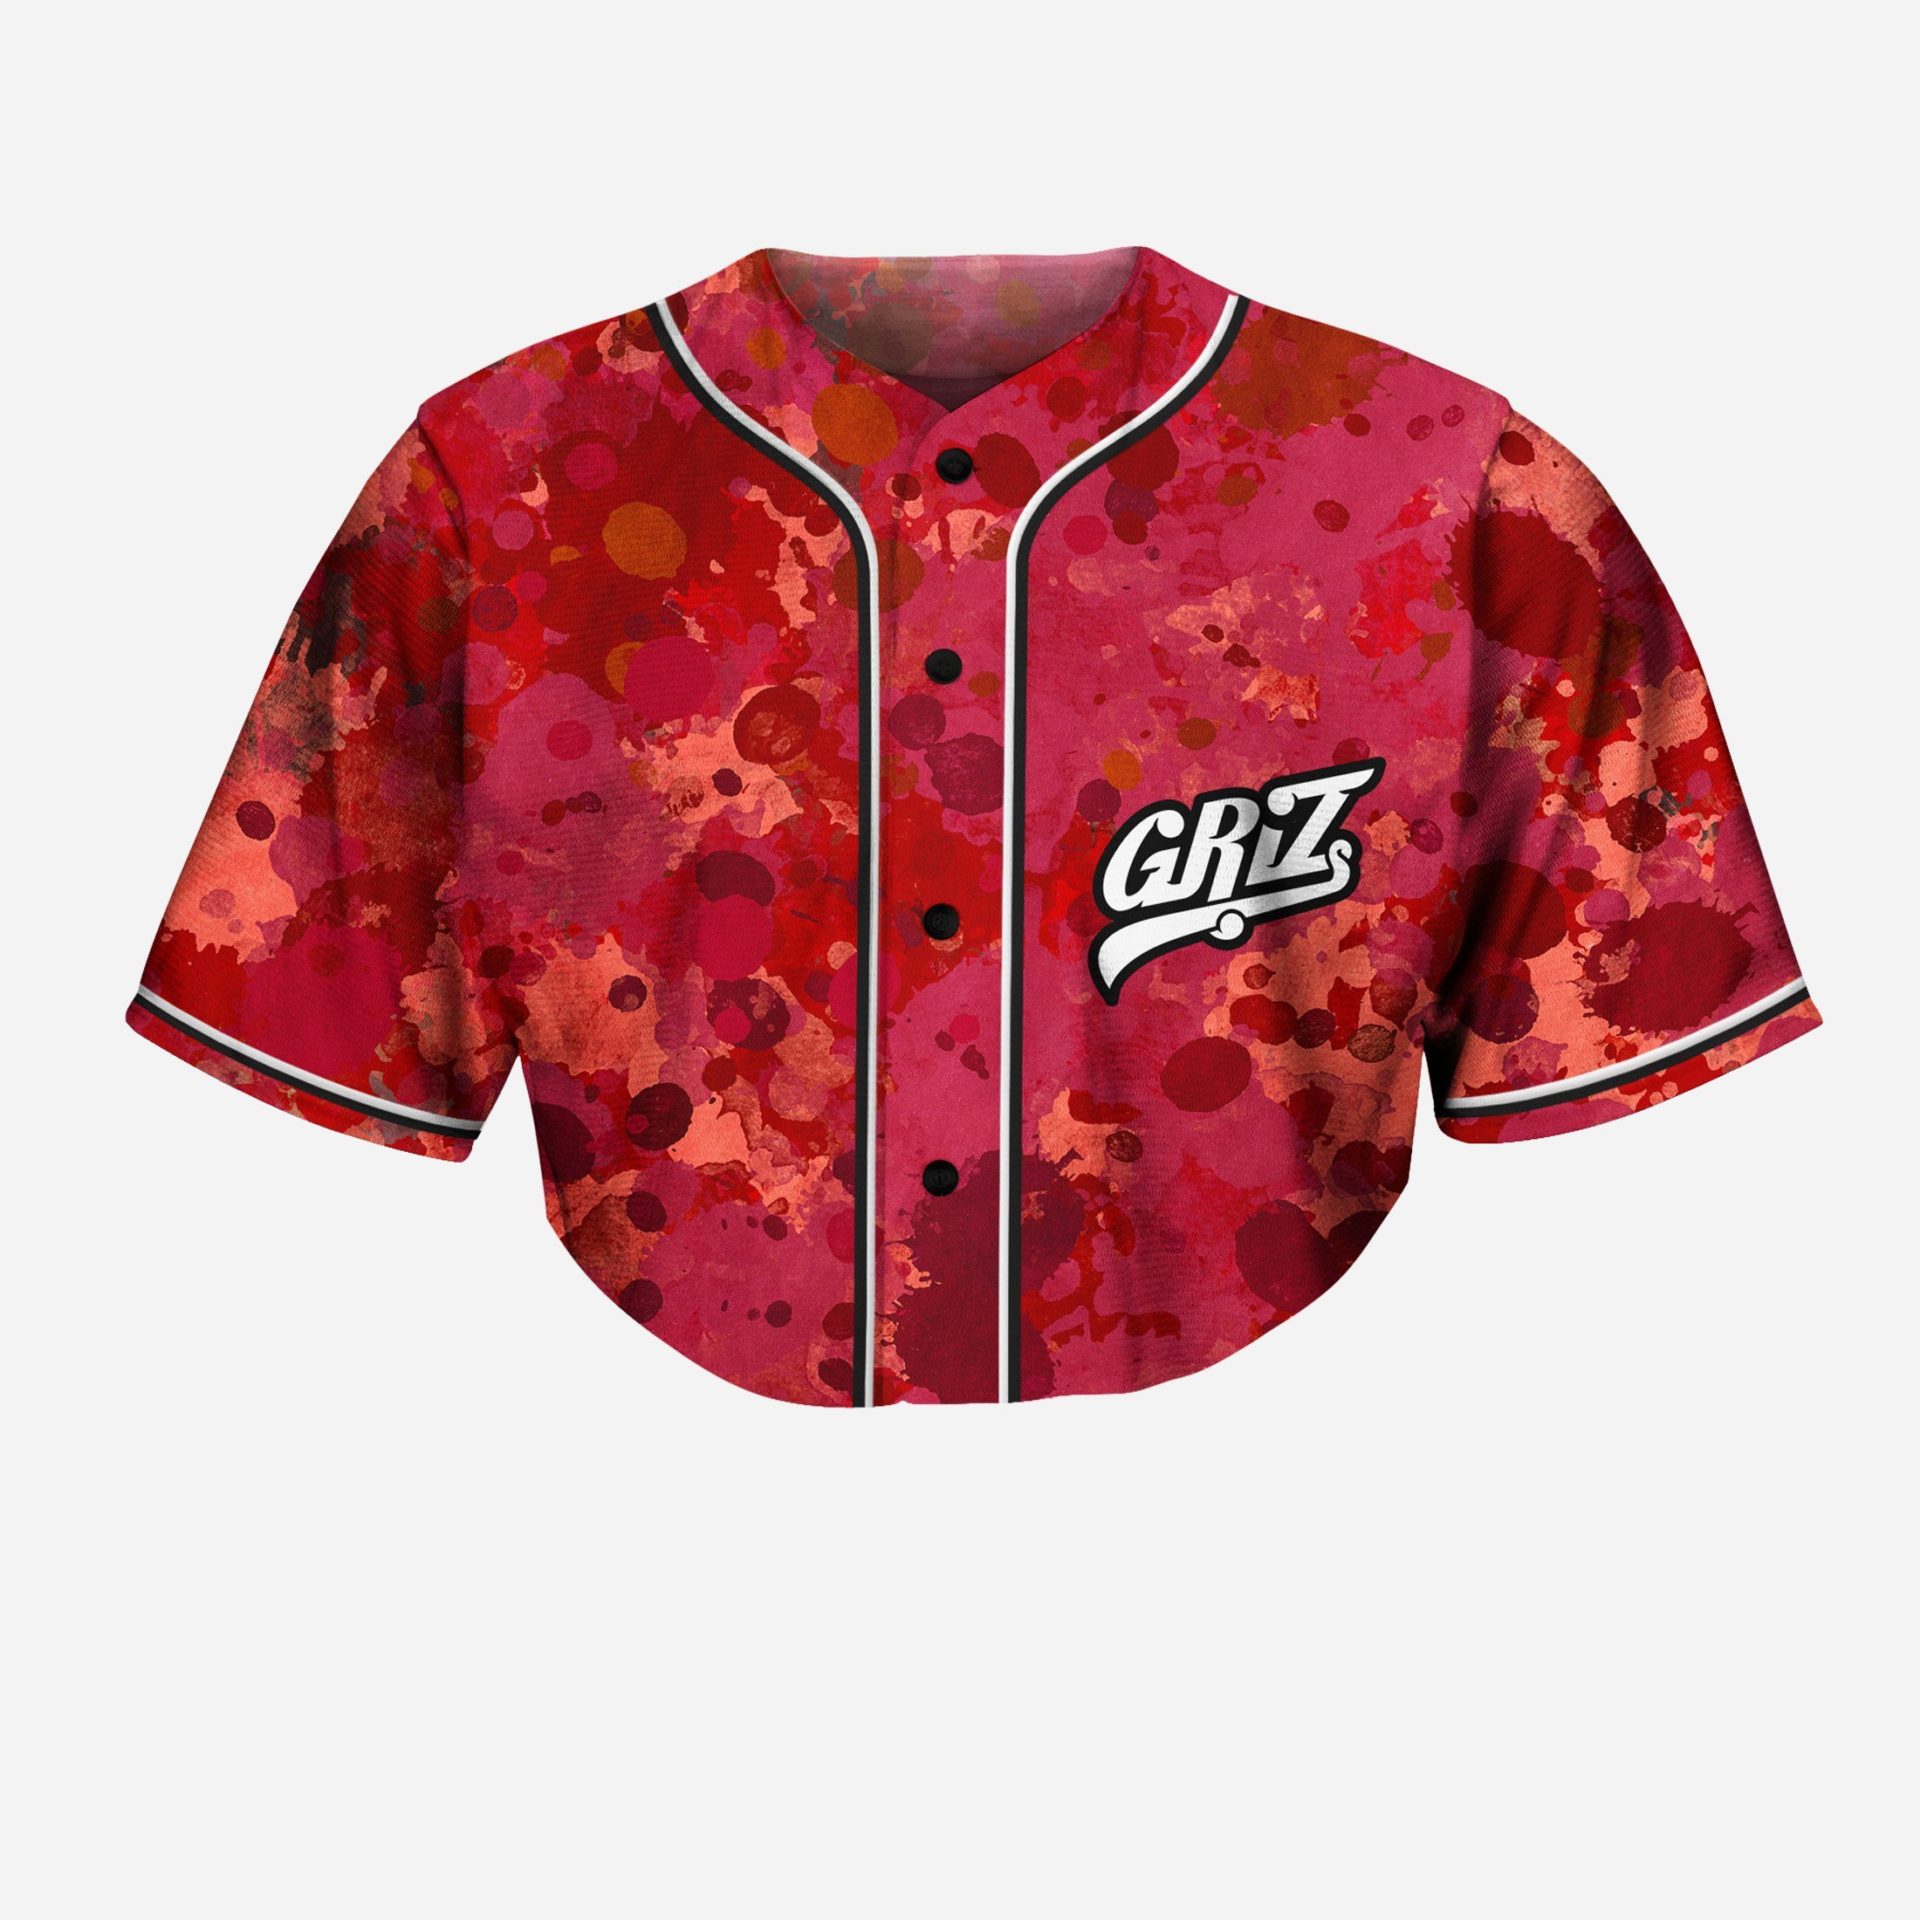 Griz Jersey with Drip Hood, Rave Jersey